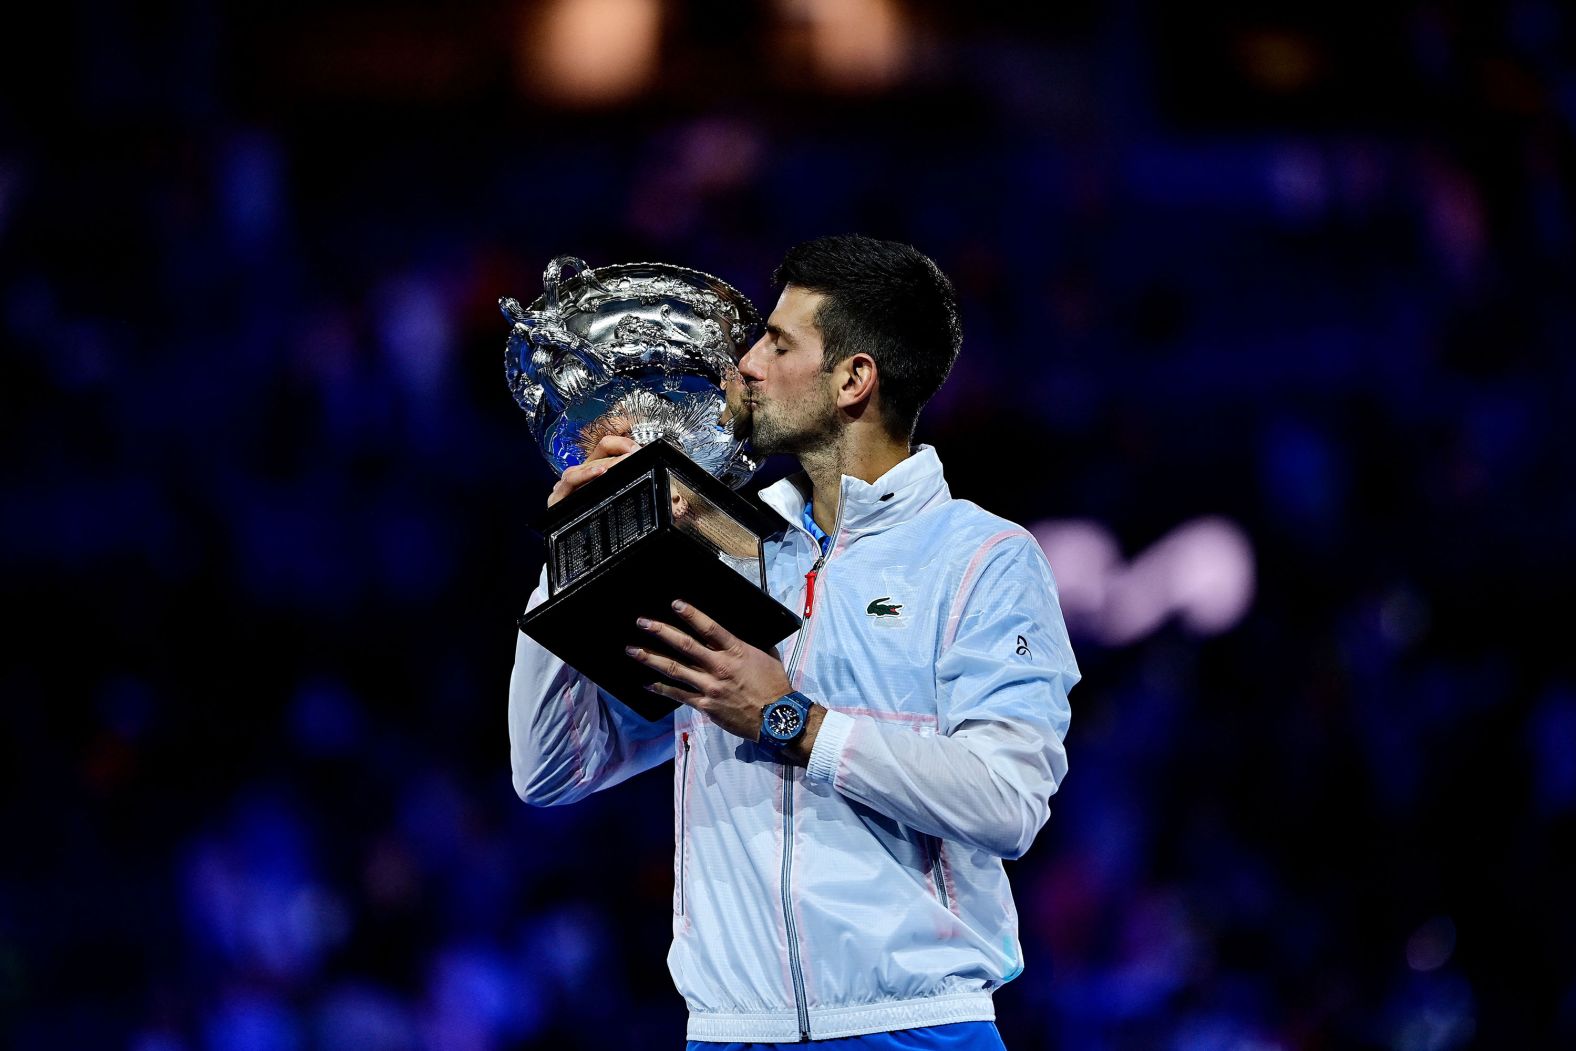 Tennis superstar Novak Djokovic kisses his trophy after <a href="index.php?page=&url=https%3A%2F%2Fwww.cnn.com%2F2023%2F01%2F29%2Ftennis%2Fnovak-djokovic-stefanos-tsitsipas-australian-open-final-spt-intl%2Findex.html" target="_blank">winning the Australian Open</a> on Sunday, January 29. Djokovic has now won 22 grand slam titles, tying him with Rafael Nadal for the most all time by a male player.